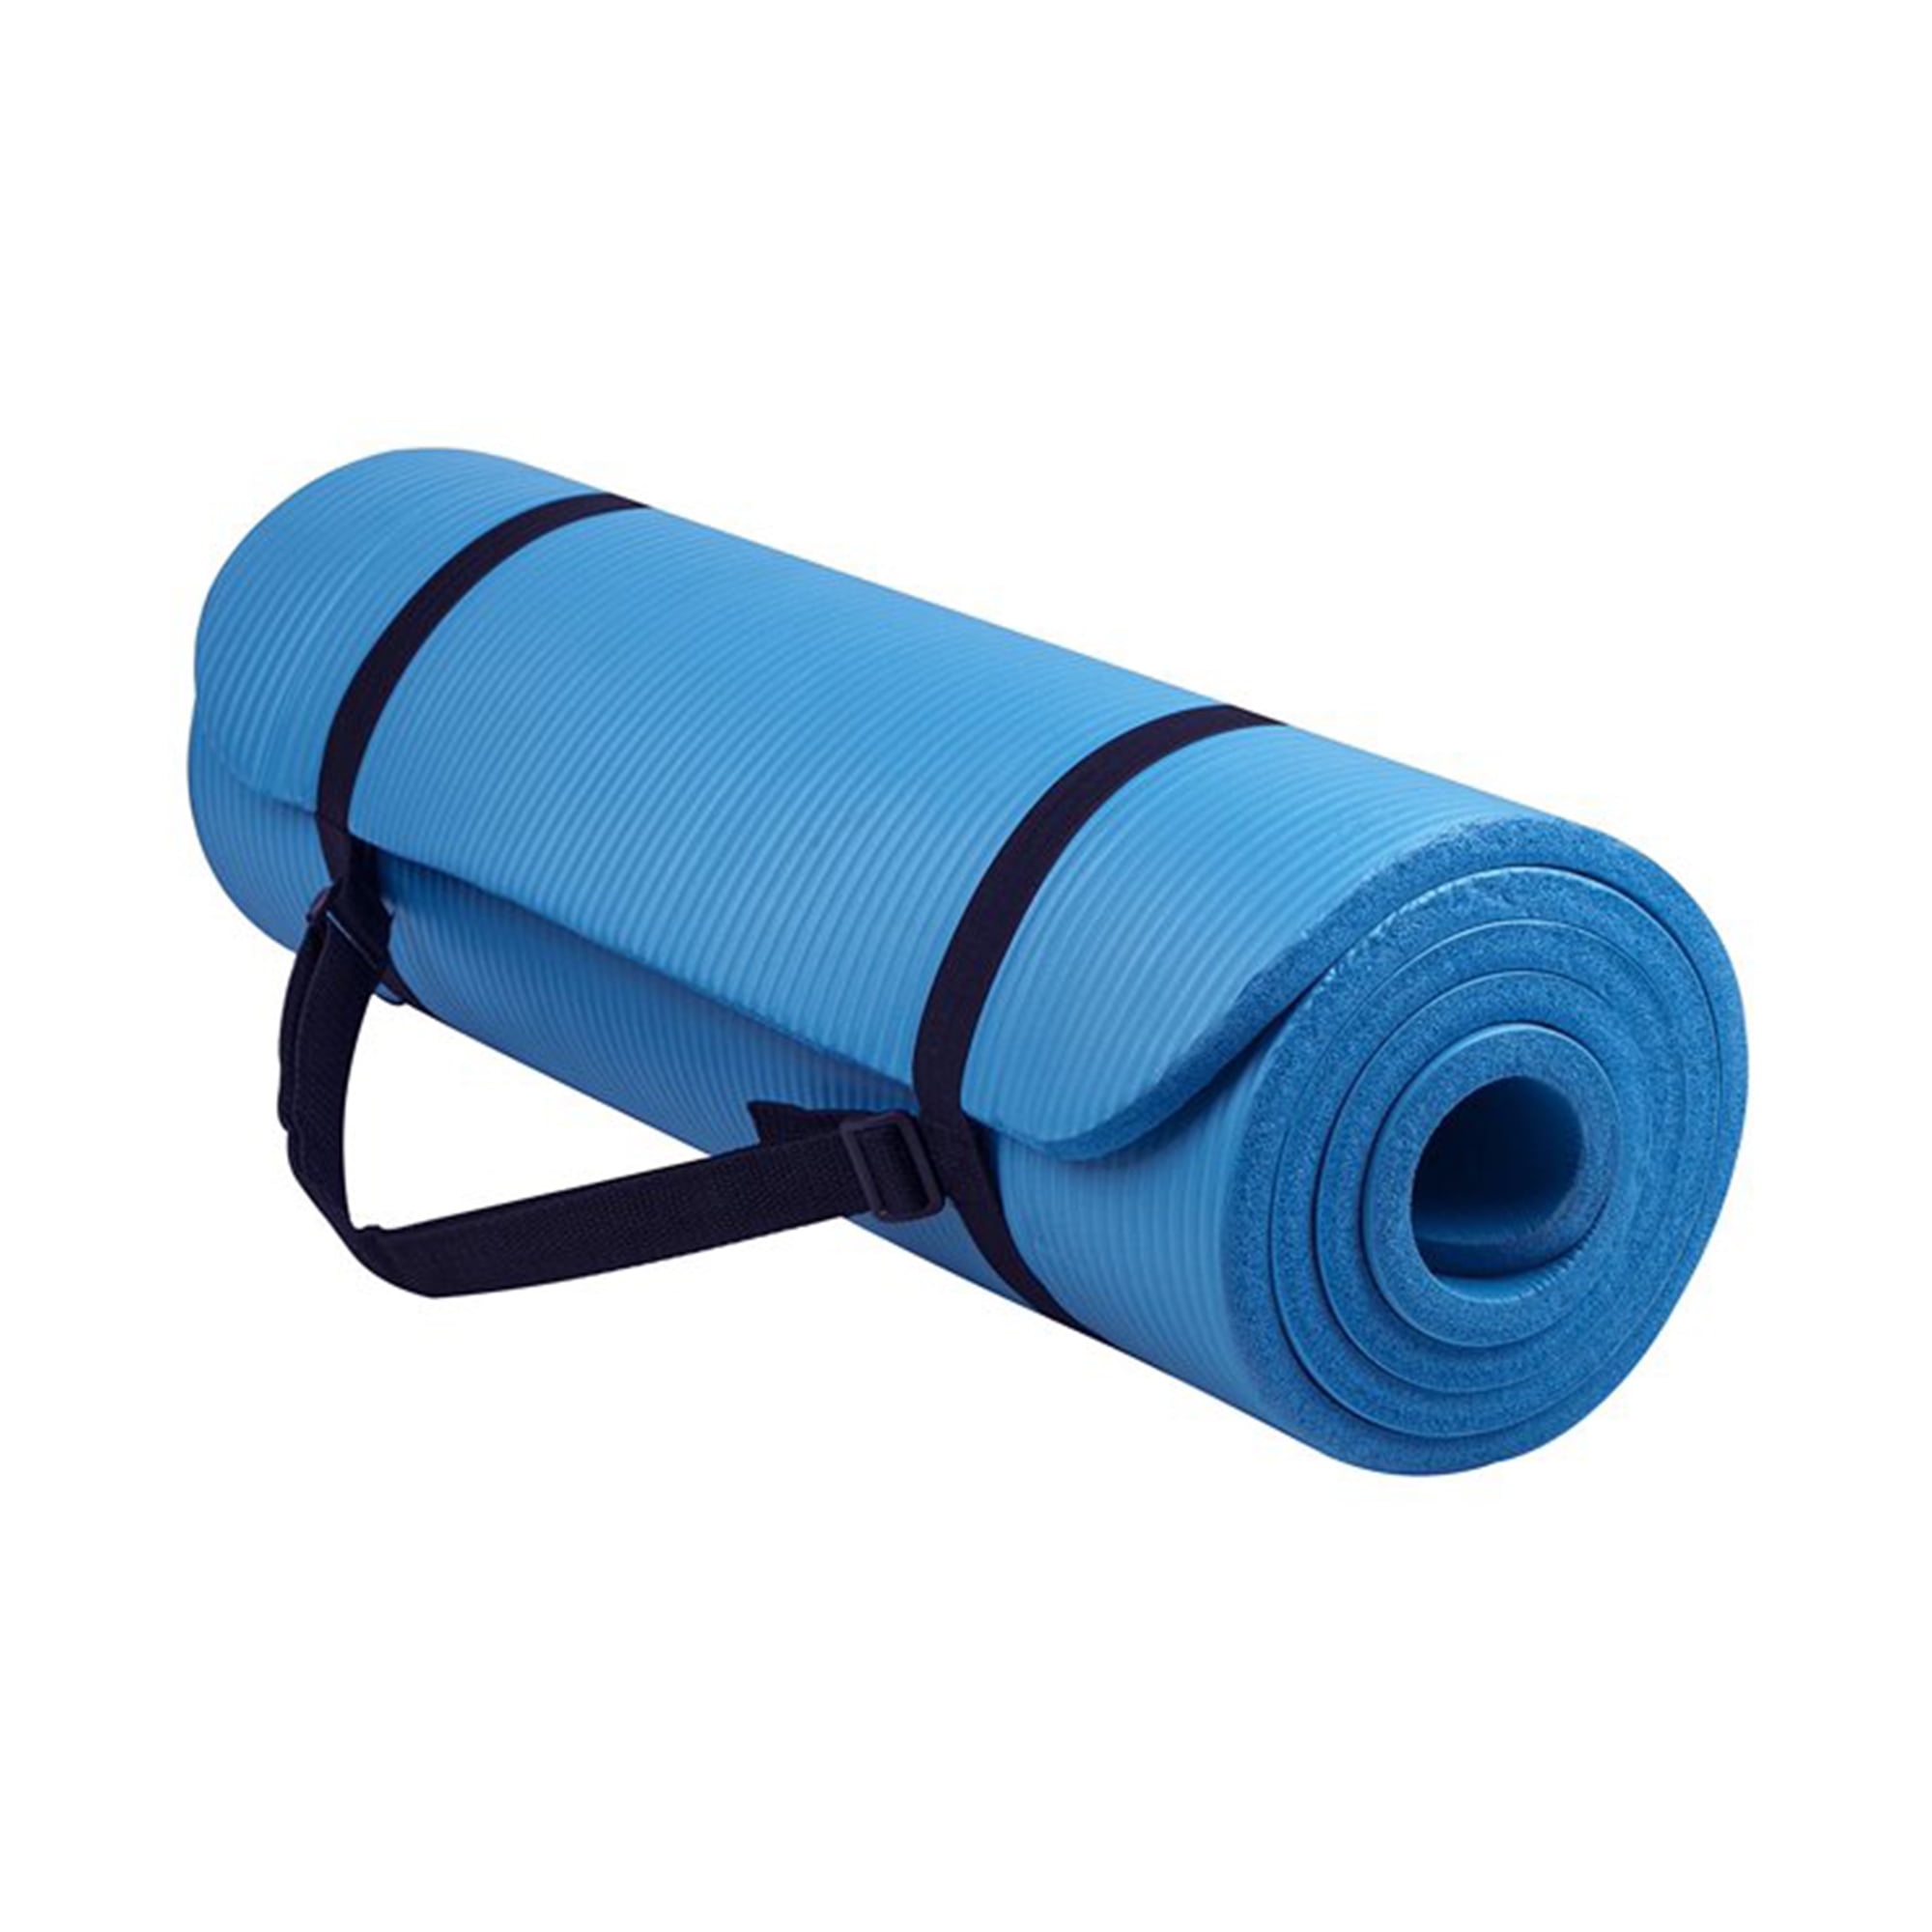 Everyday Essentials All-Purpose 1/2-Inch High Density Foam Exercise ...